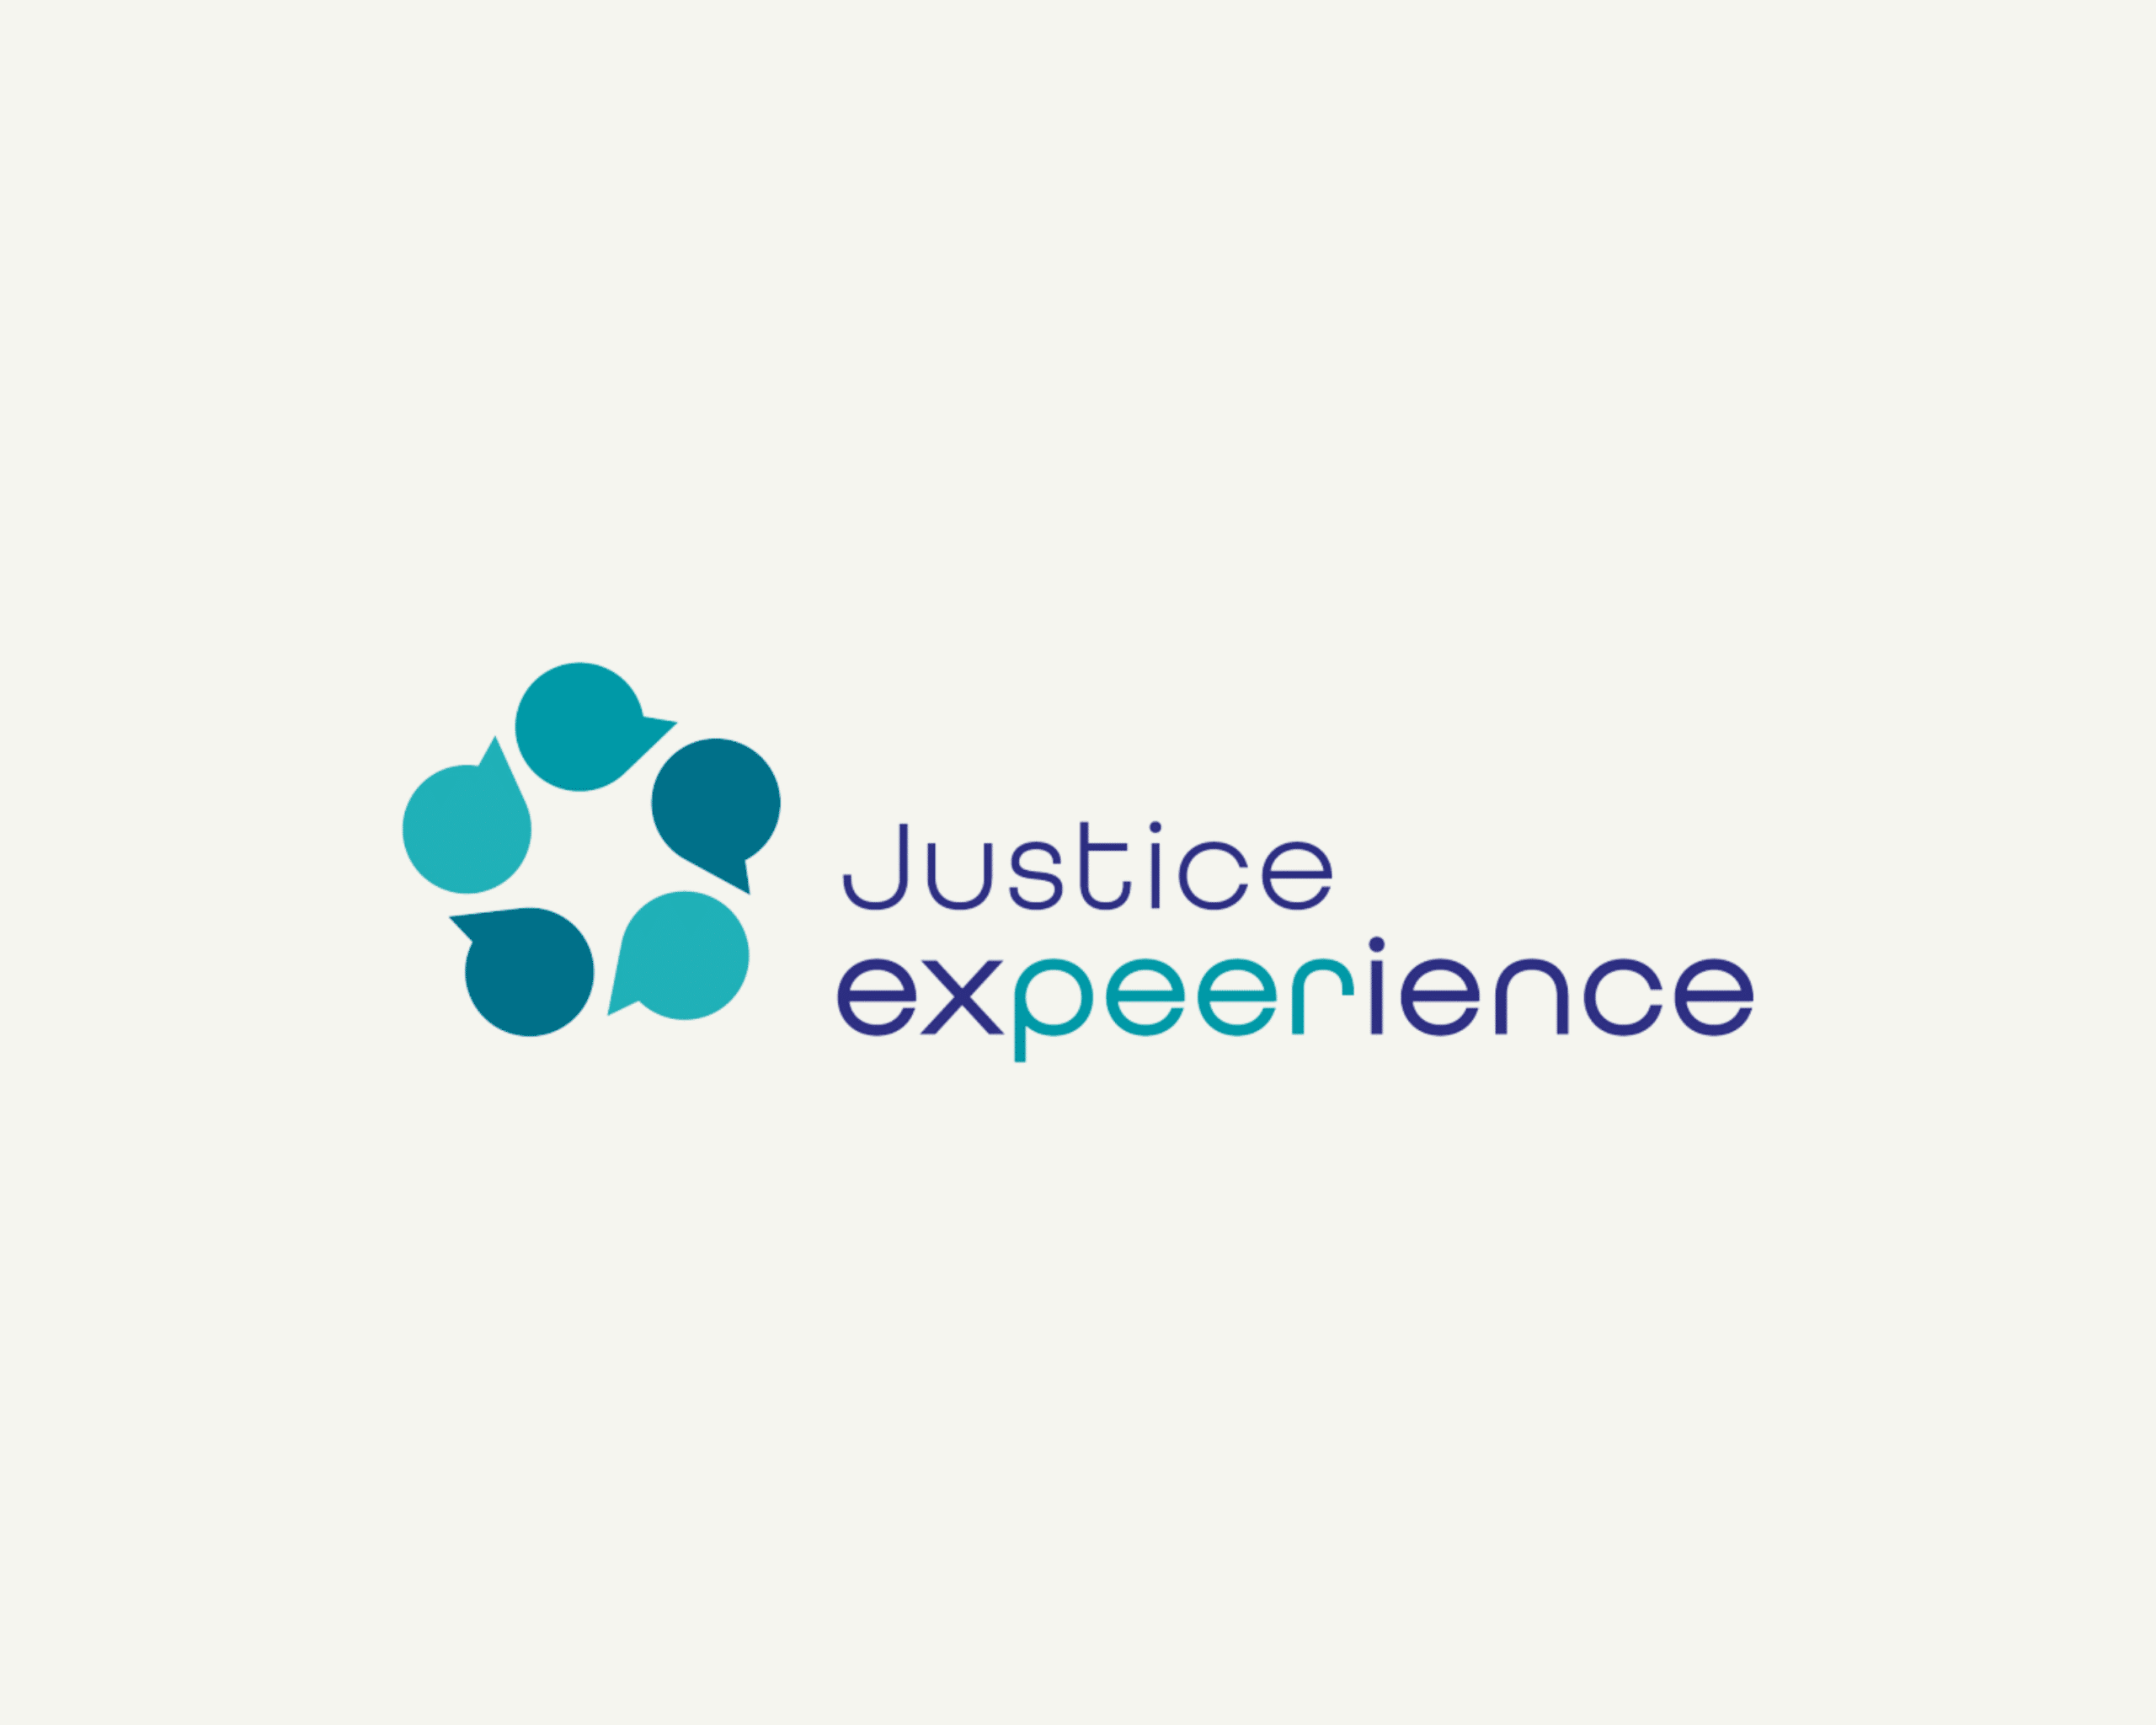 What’s new with Justice ExPEERience?